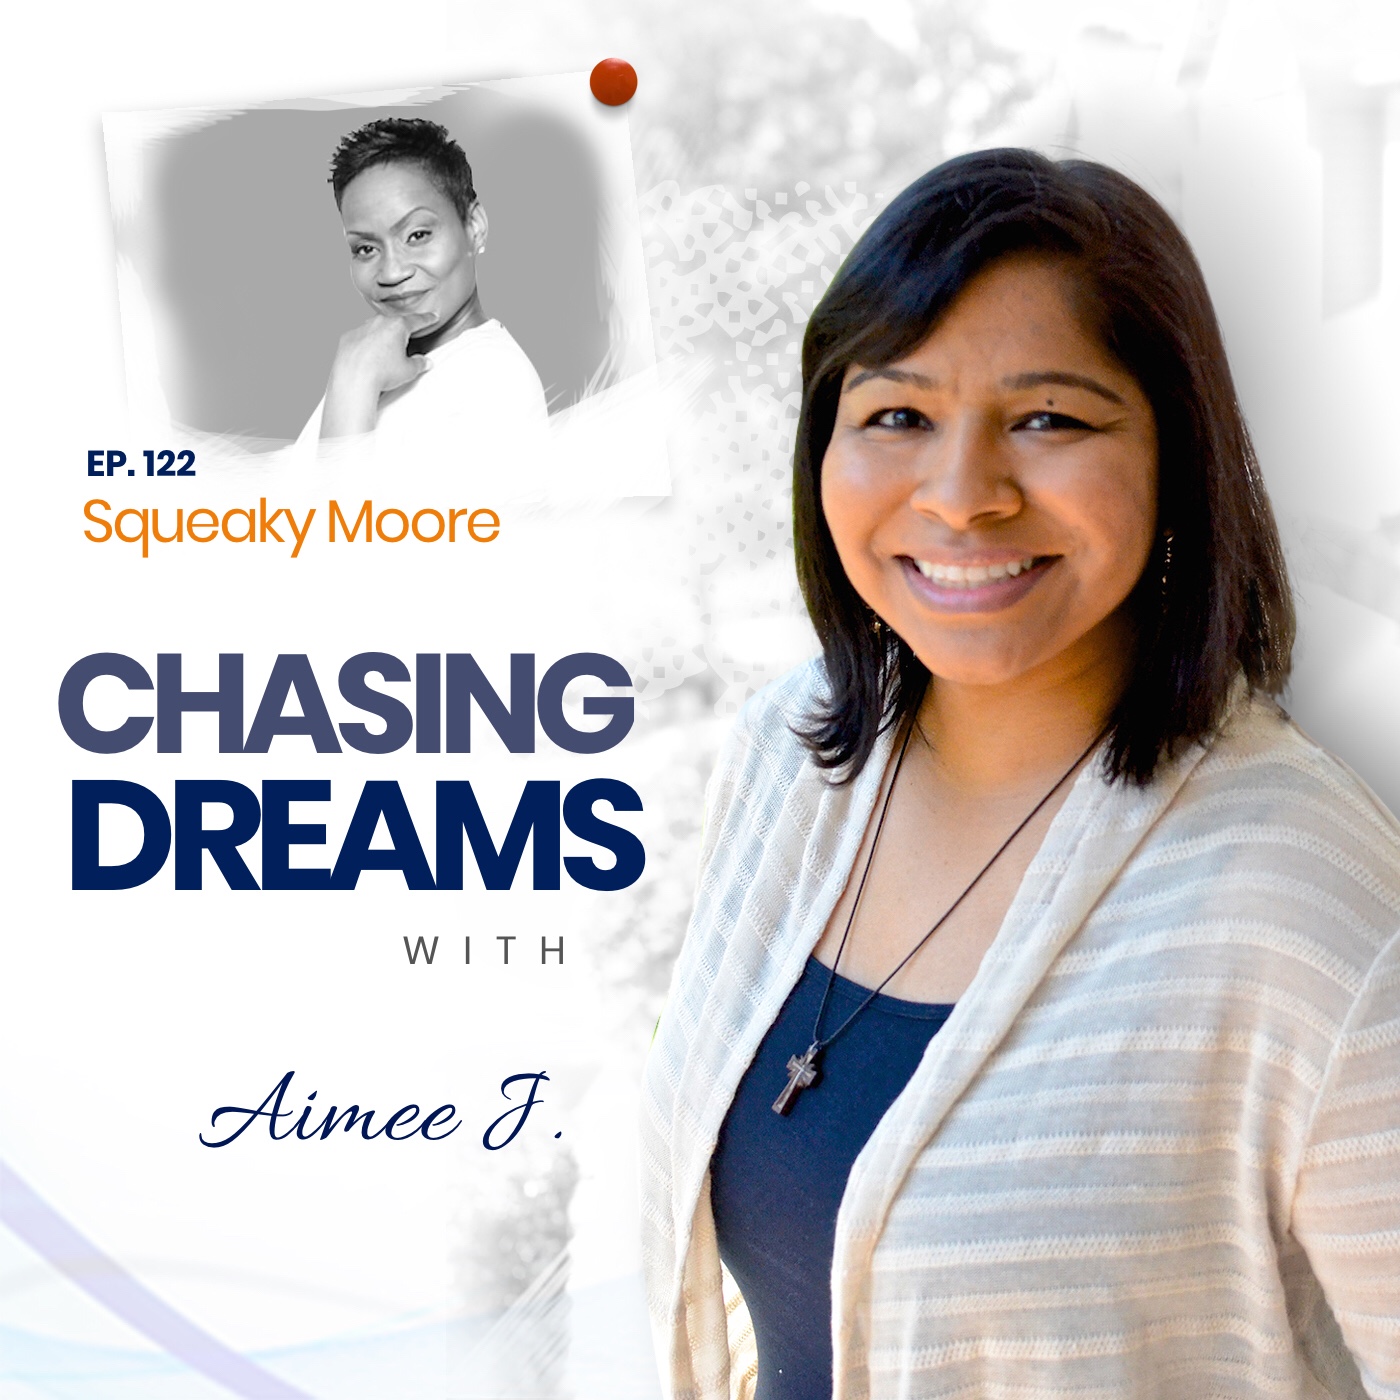 Squeaky Moore – Mistakes I’ve Made So You Don’t Have To (Chasing Dreams with Aimee J.)